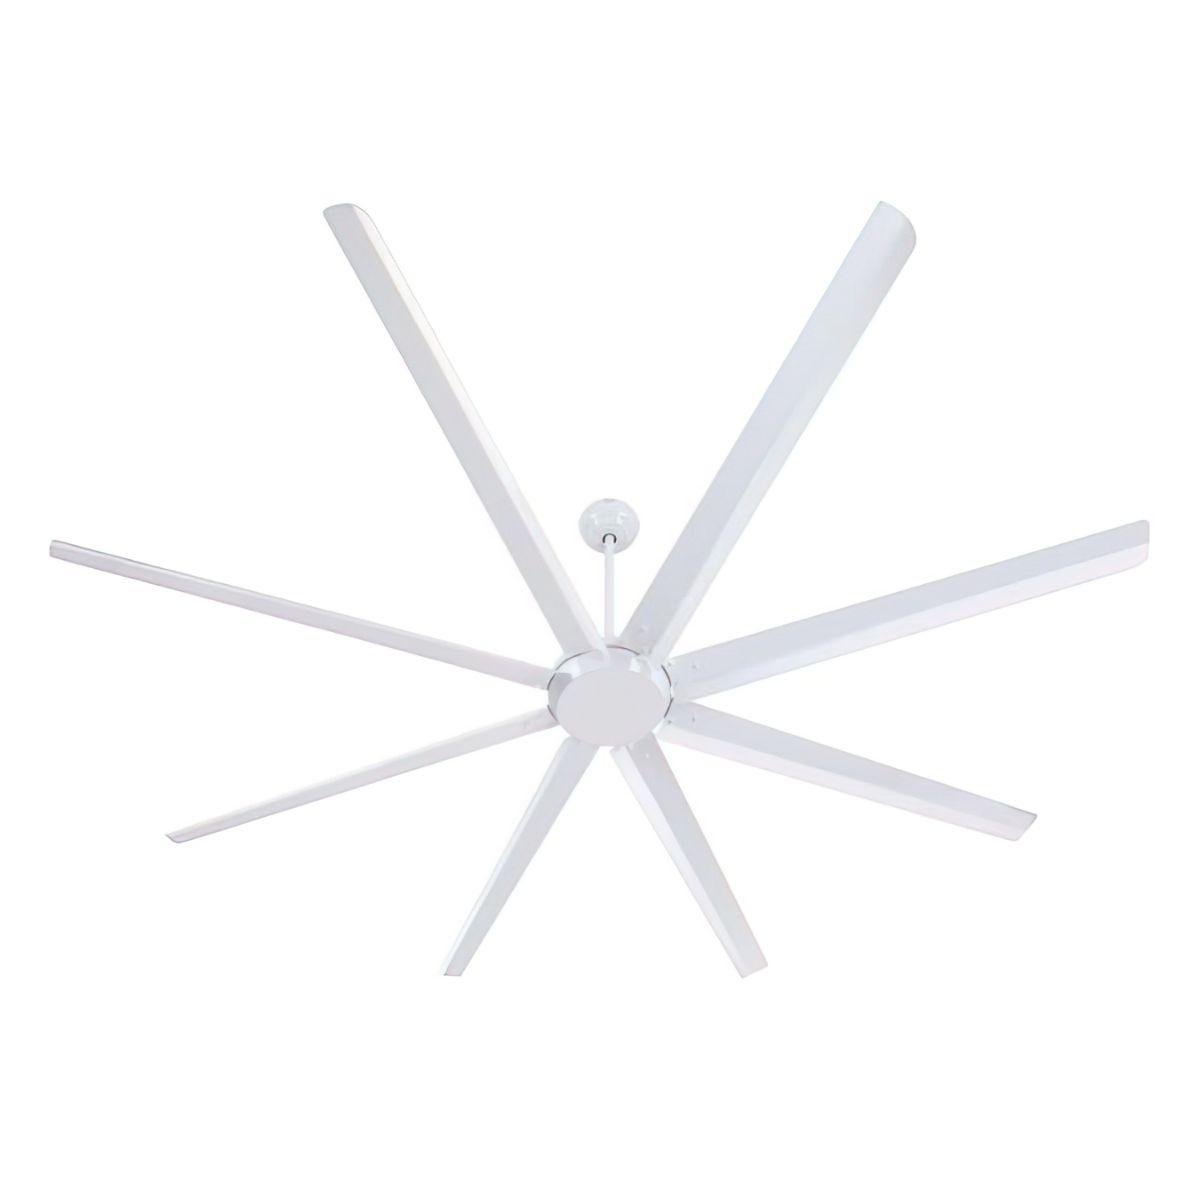 Widespan 100 Inch DC Industrial Windmill Outdoor Ceiling Fan With Remote, White Finish, 8 Blades